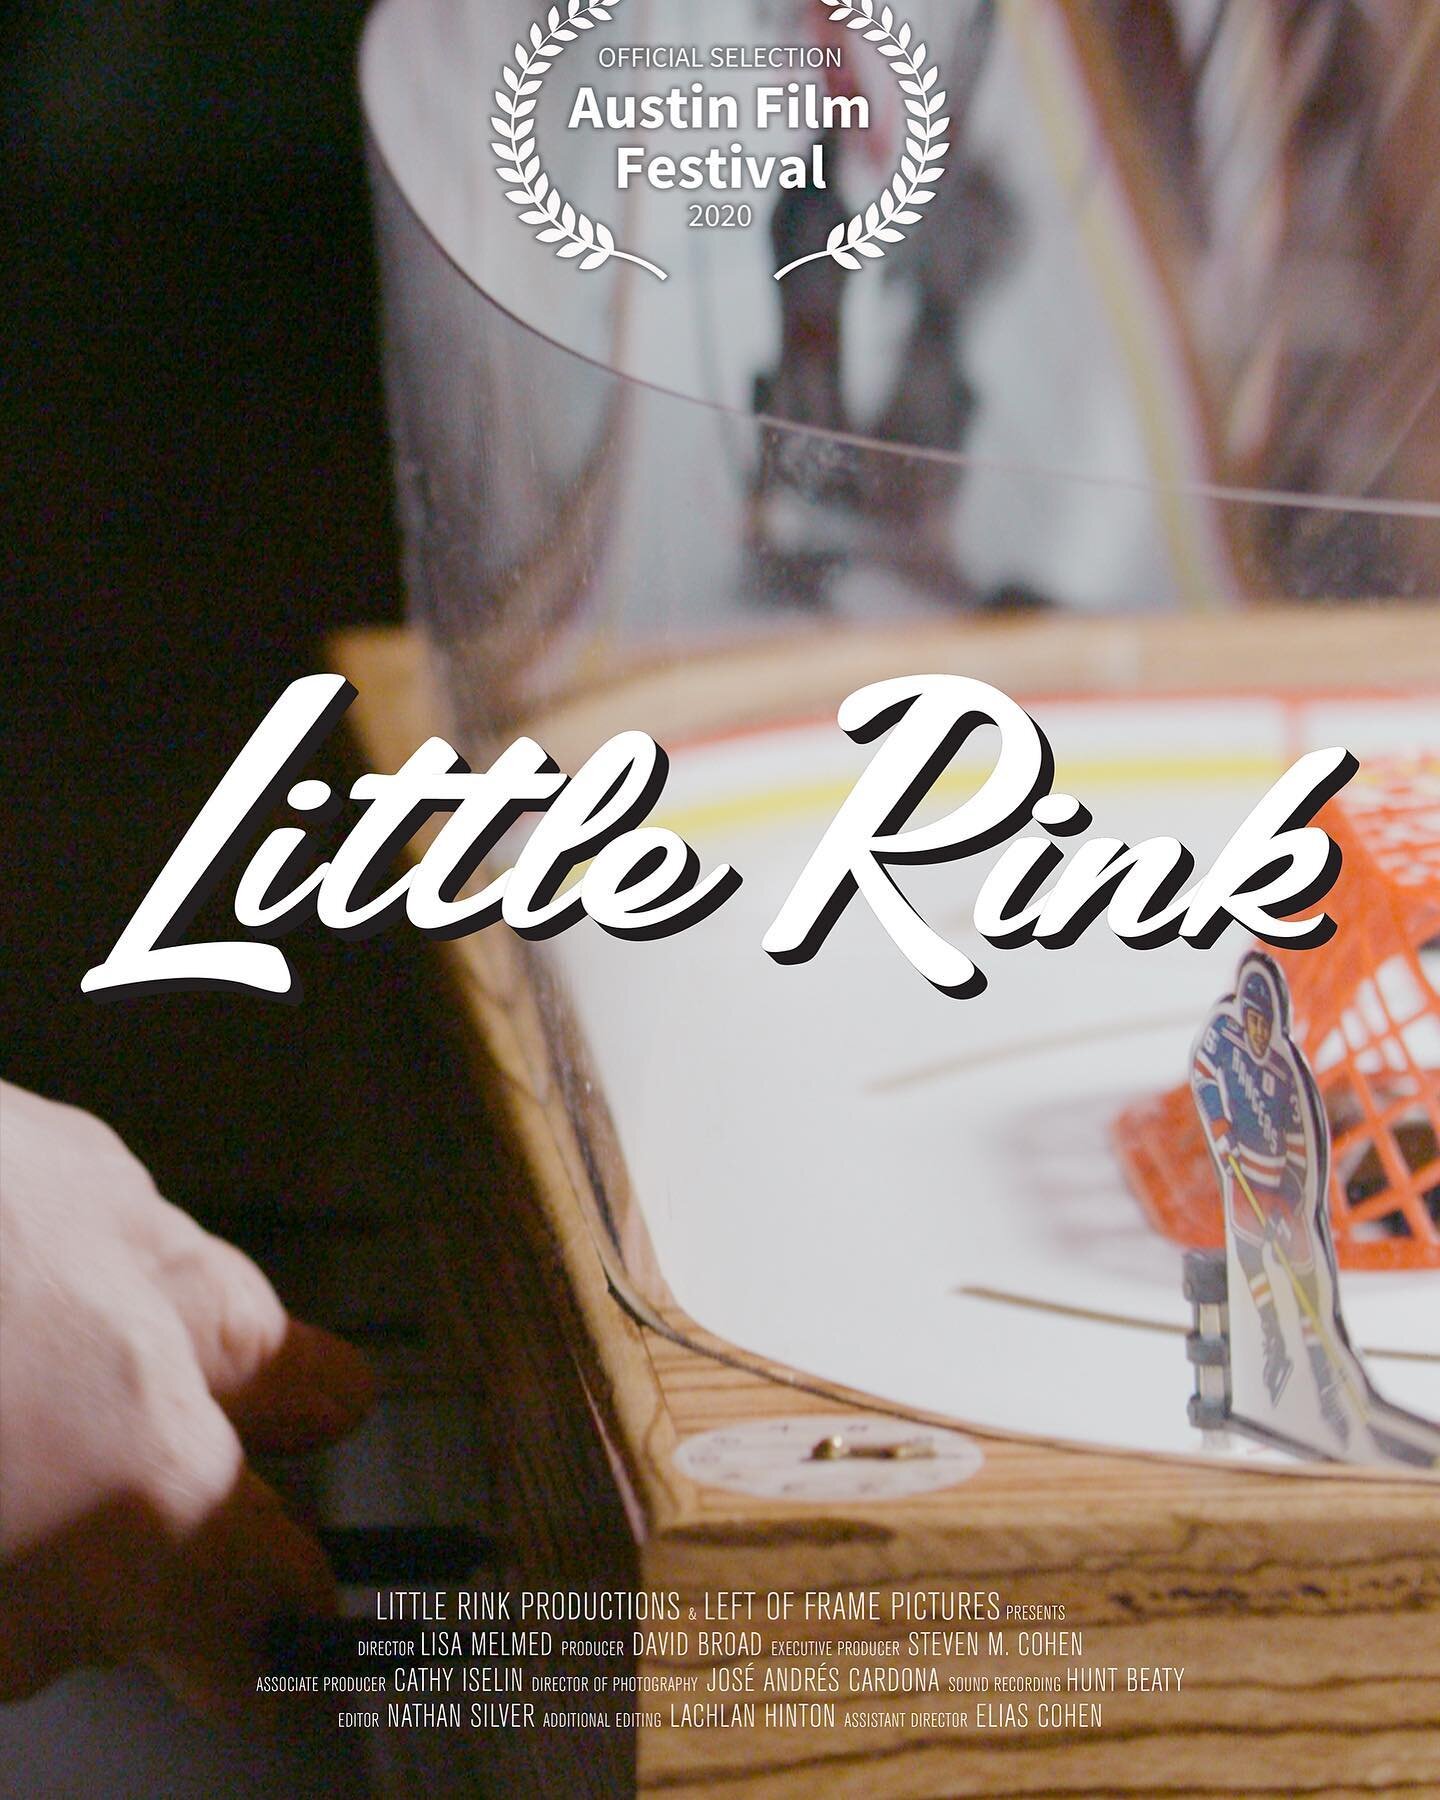 Excited to announce our selection by the @austinfilmfest #aff27 #TableHockey #ShortFilm #filmfestival #hockey